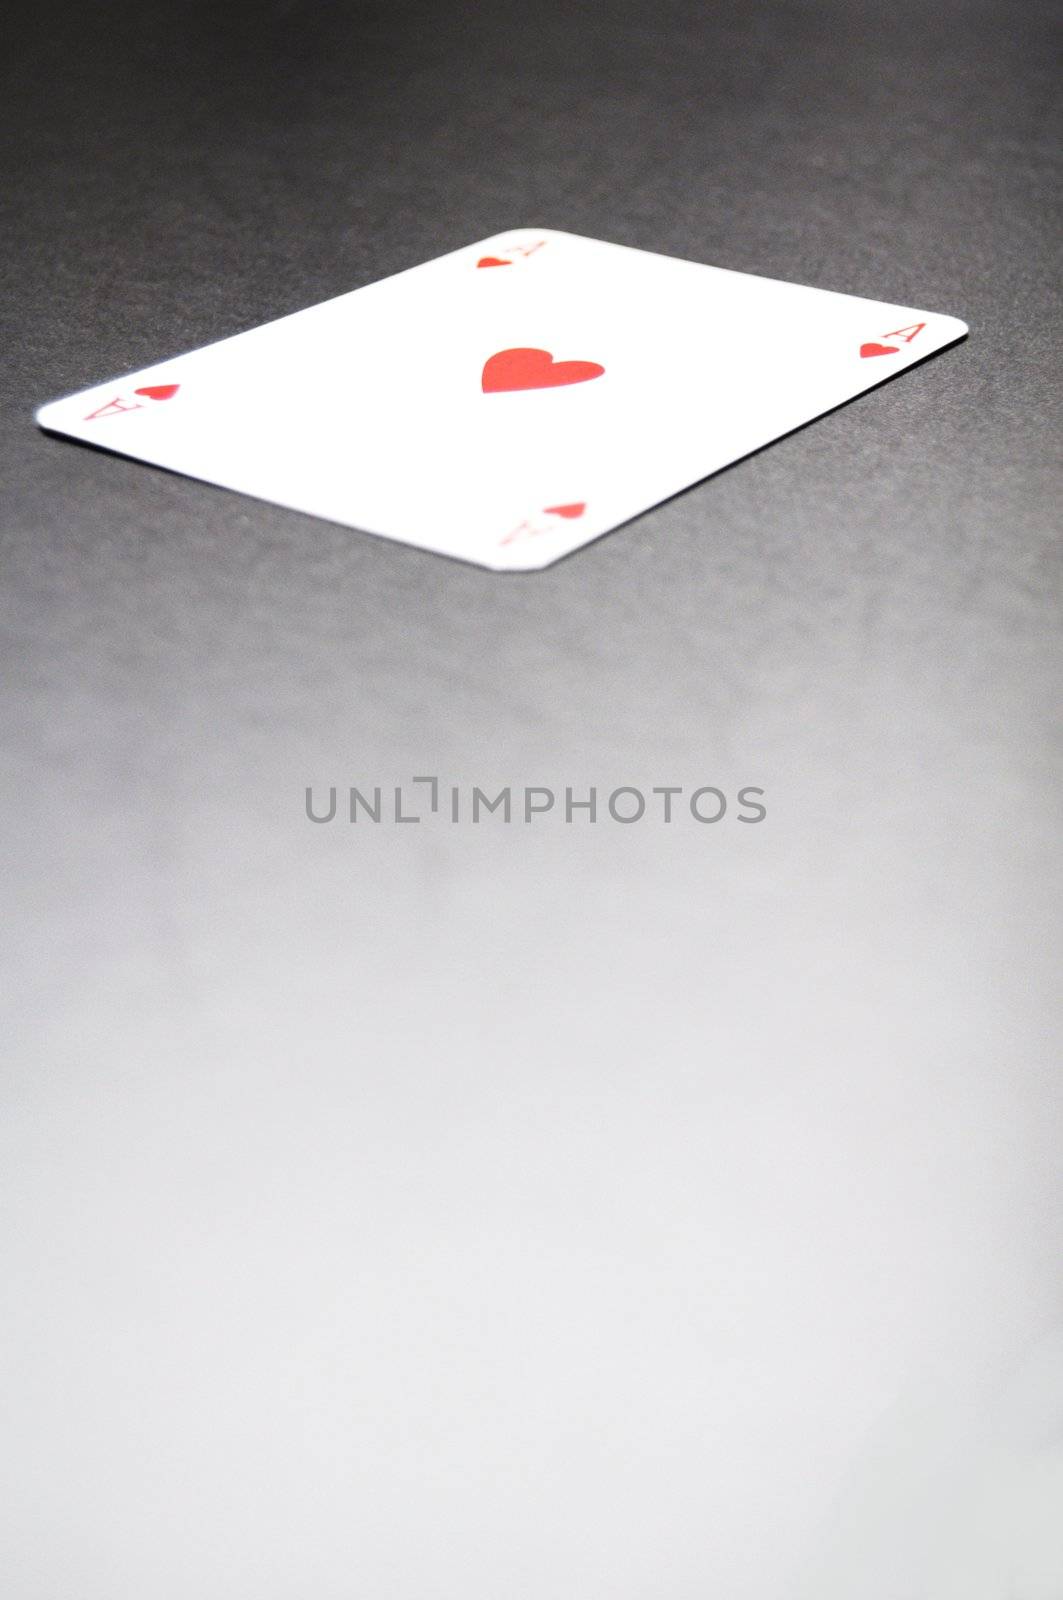 winning concept with four aces on black background